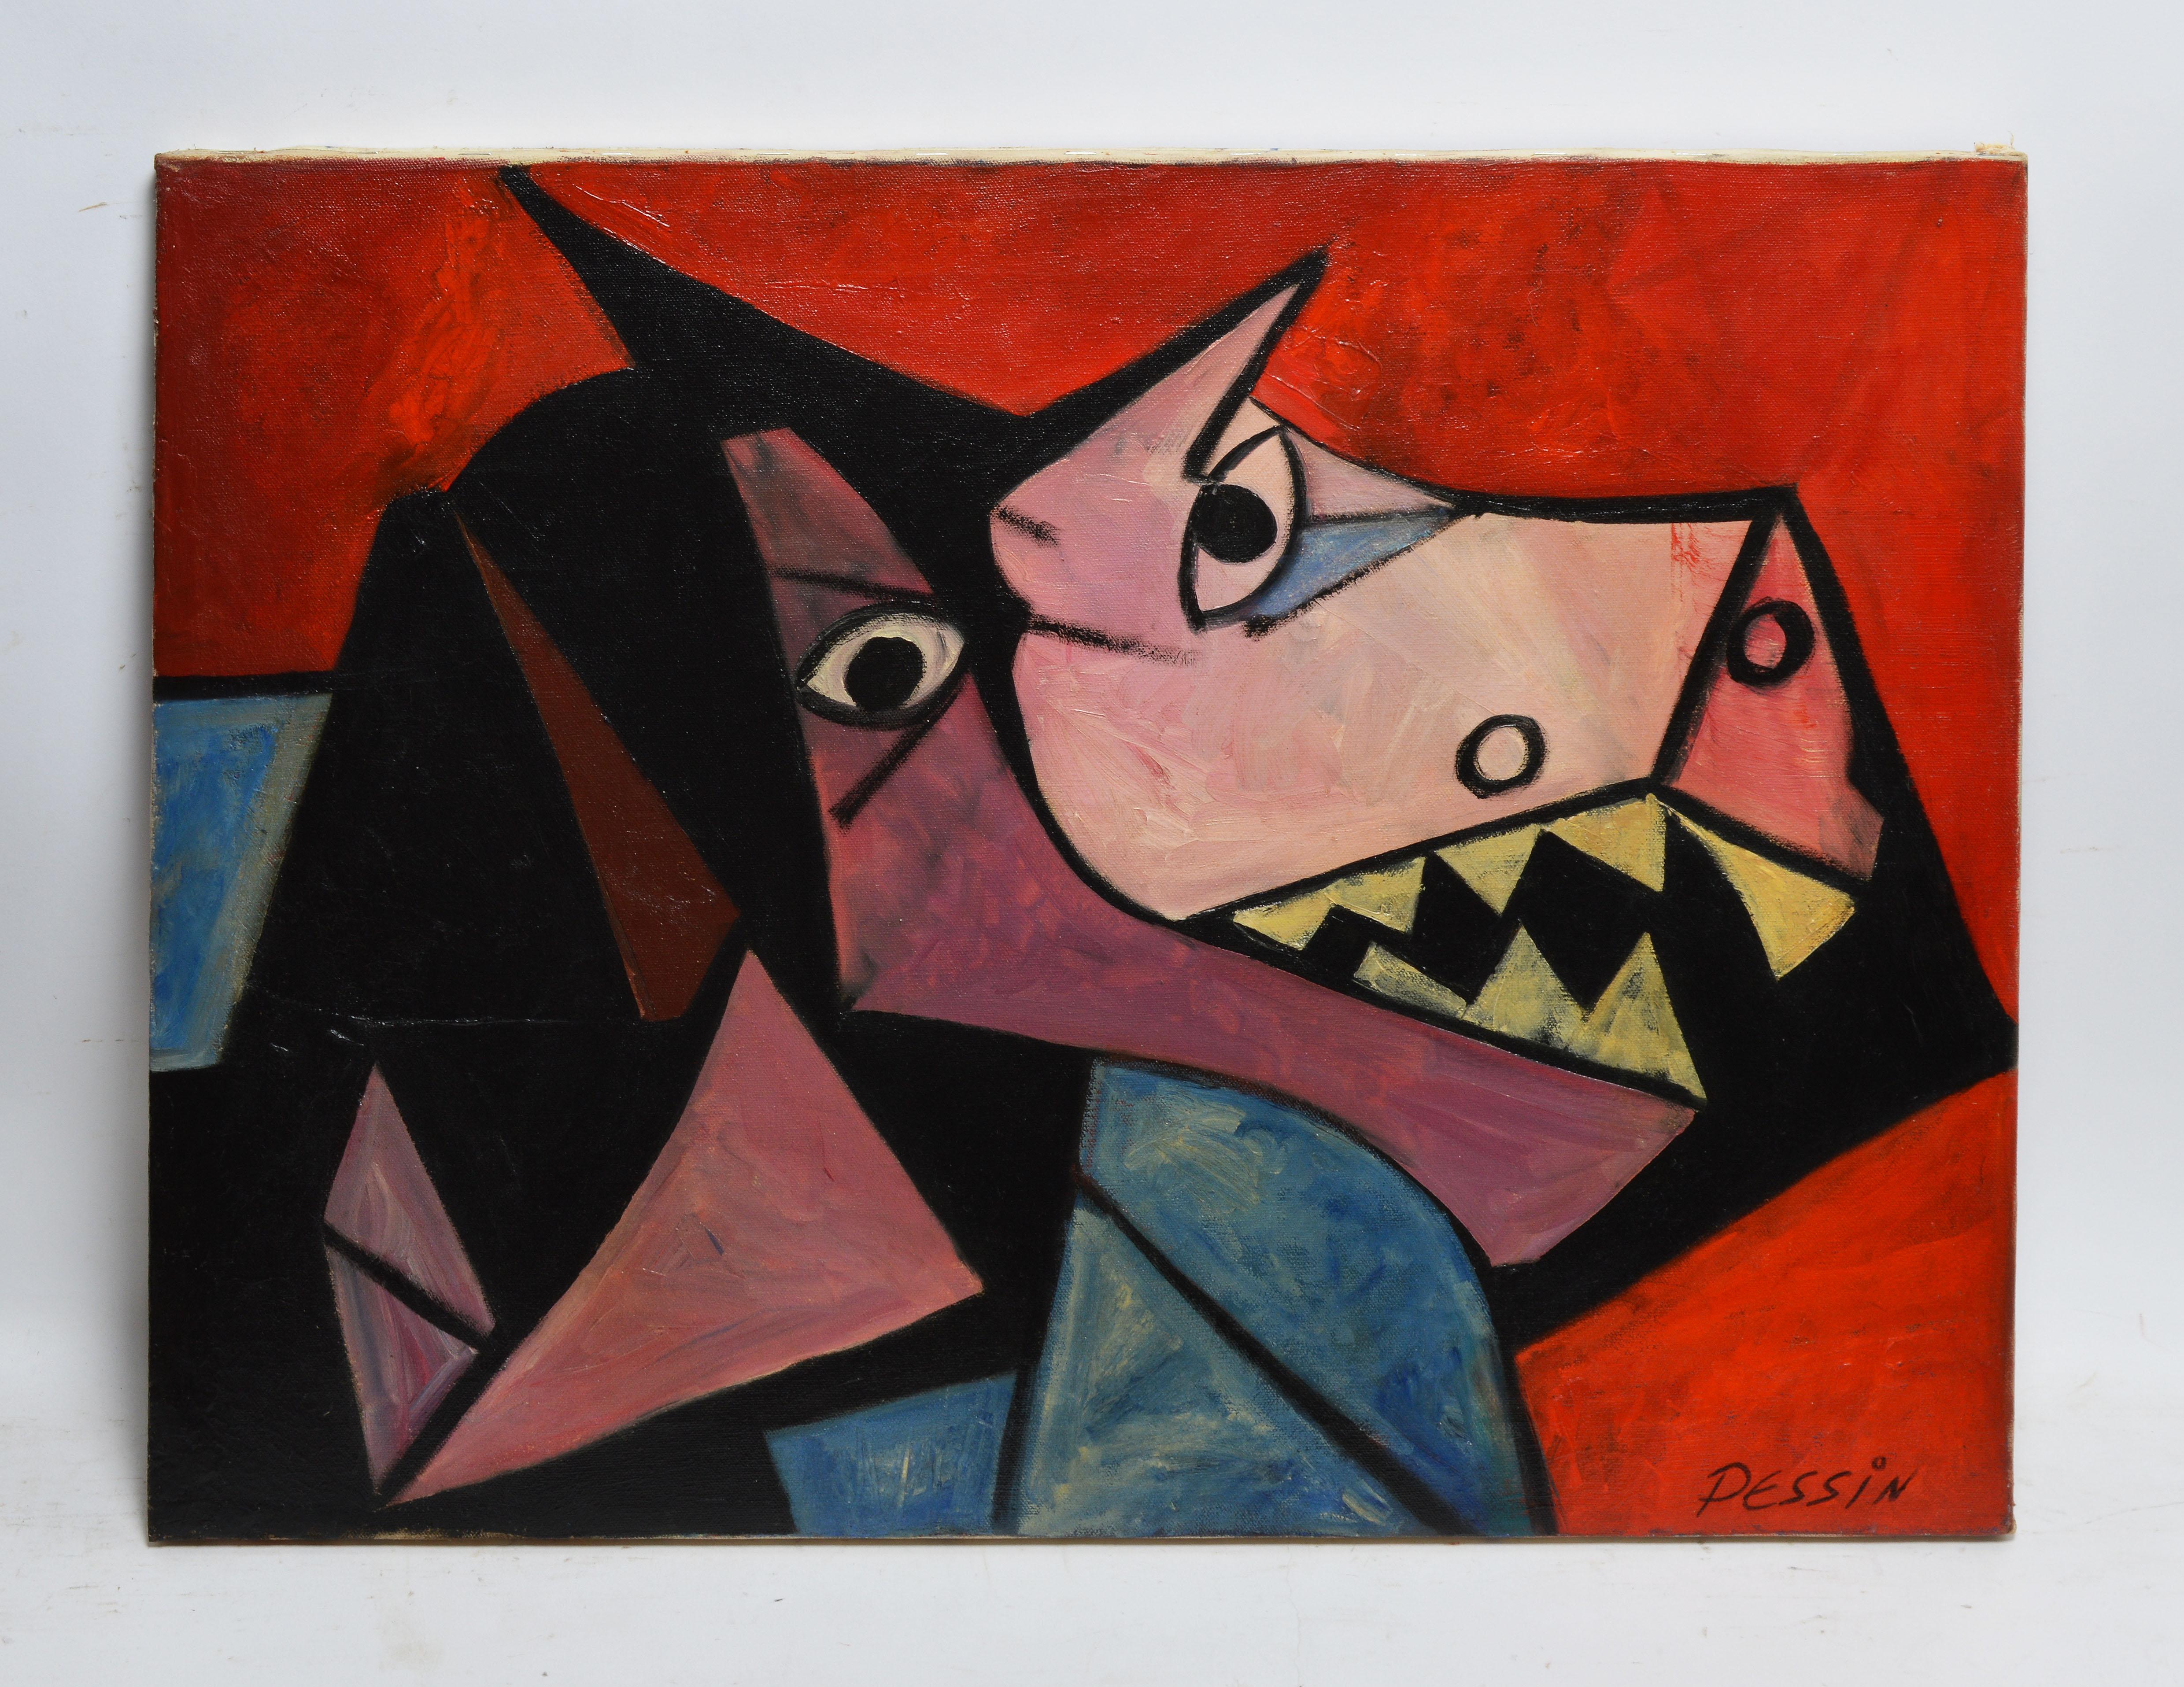 Cubist Composition of a Dog by Marc Pessin 3